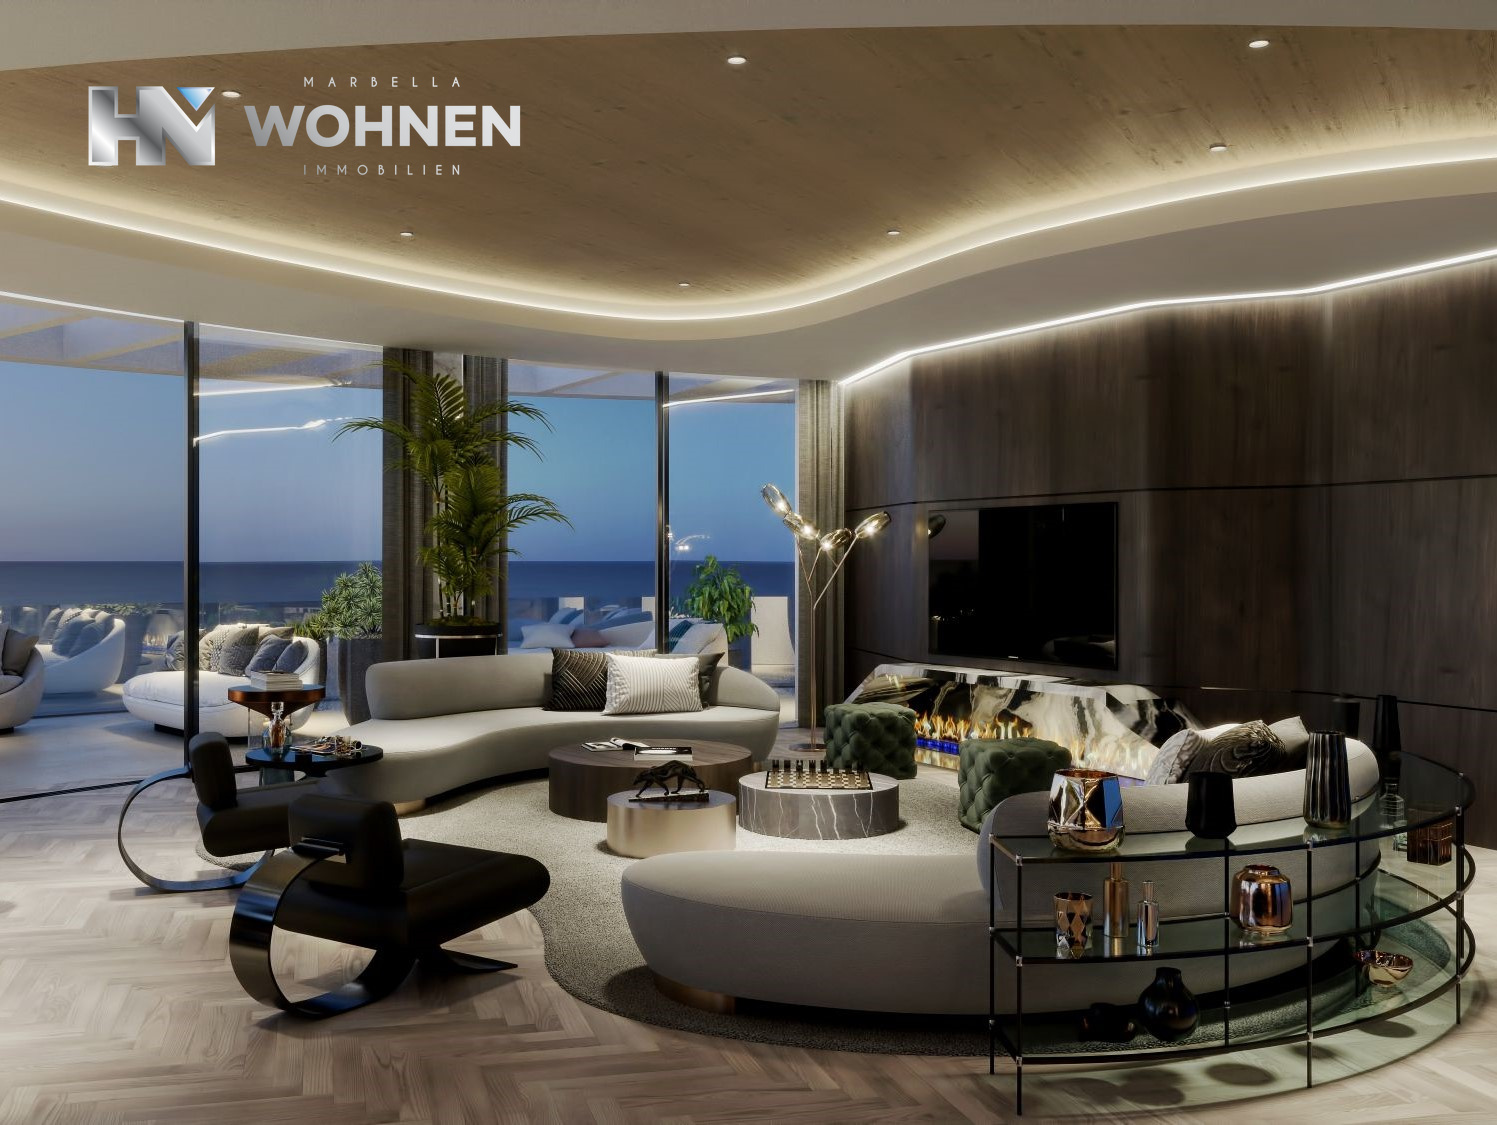 REAL ESTATE – MARBELLA WOHNEN – Advantages of having a luxury penthouse in Marbella